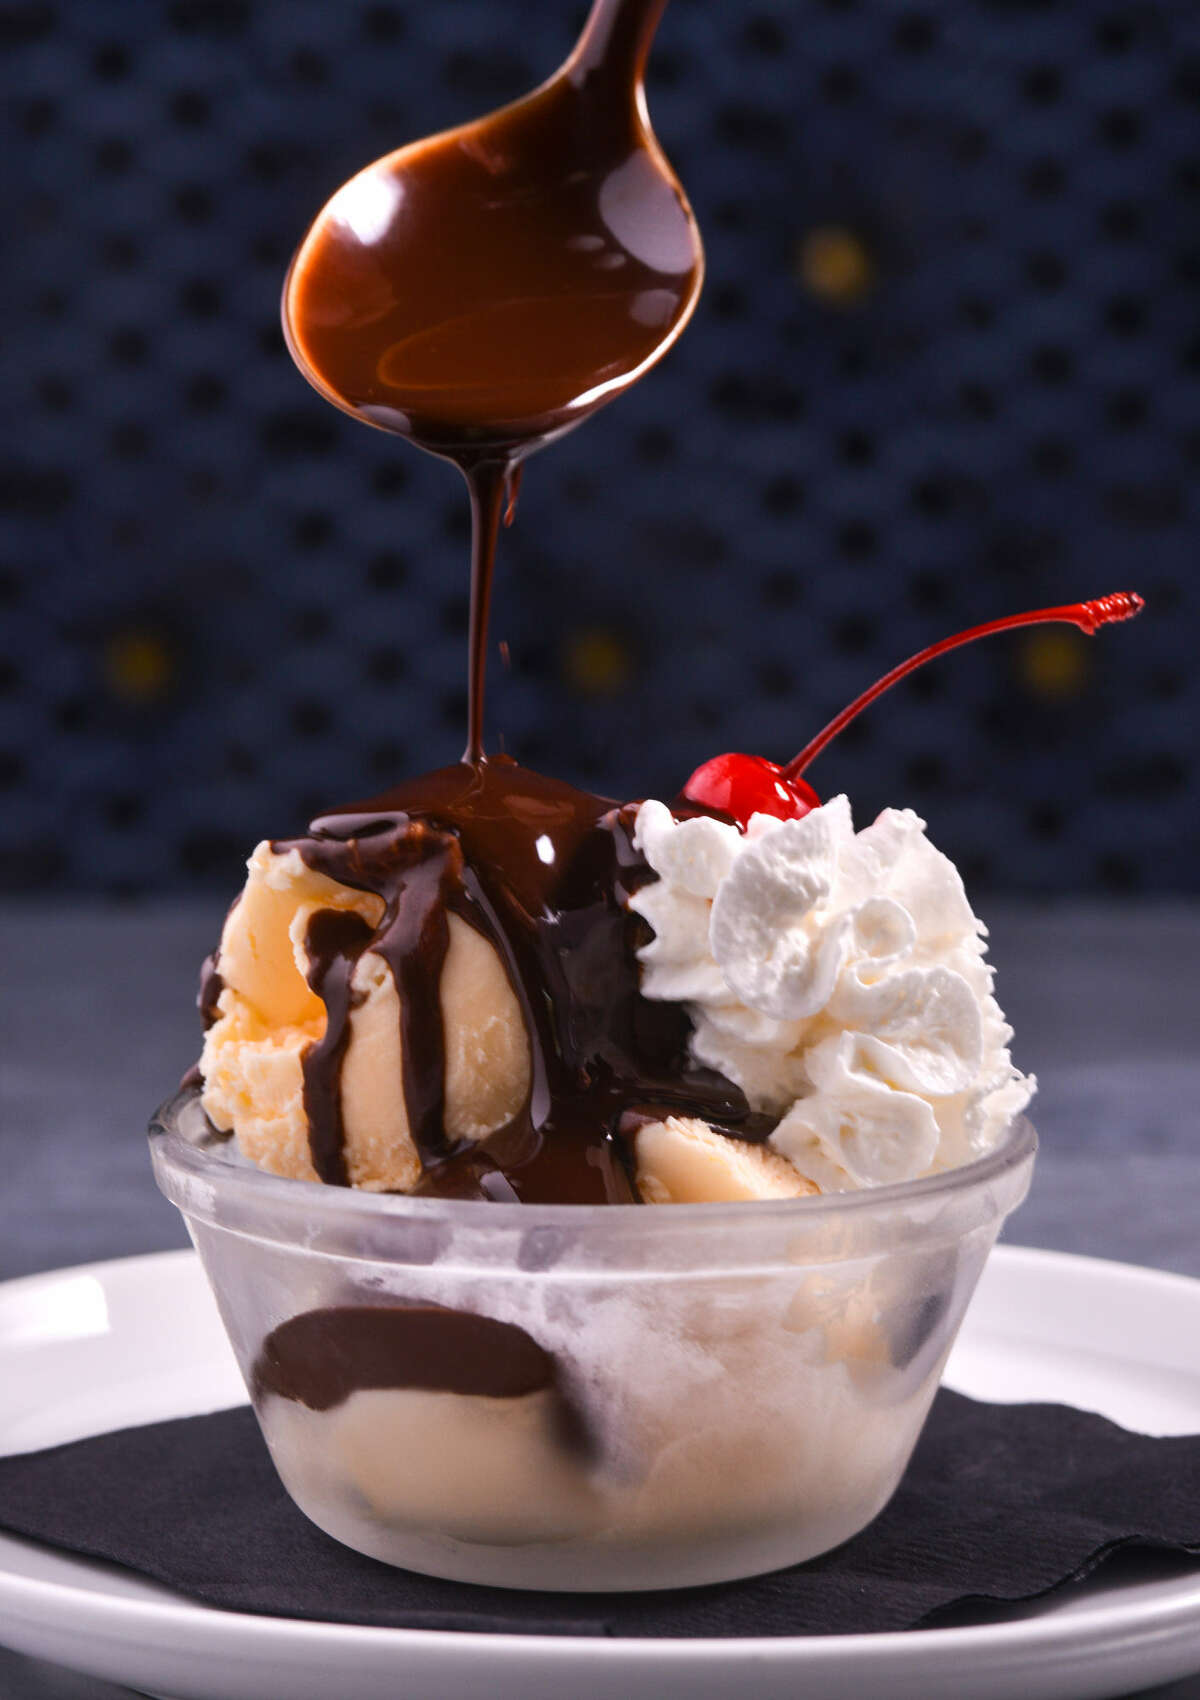 A scoop of vanilla bean ice cream is topped with an espresso-mocha ganache.